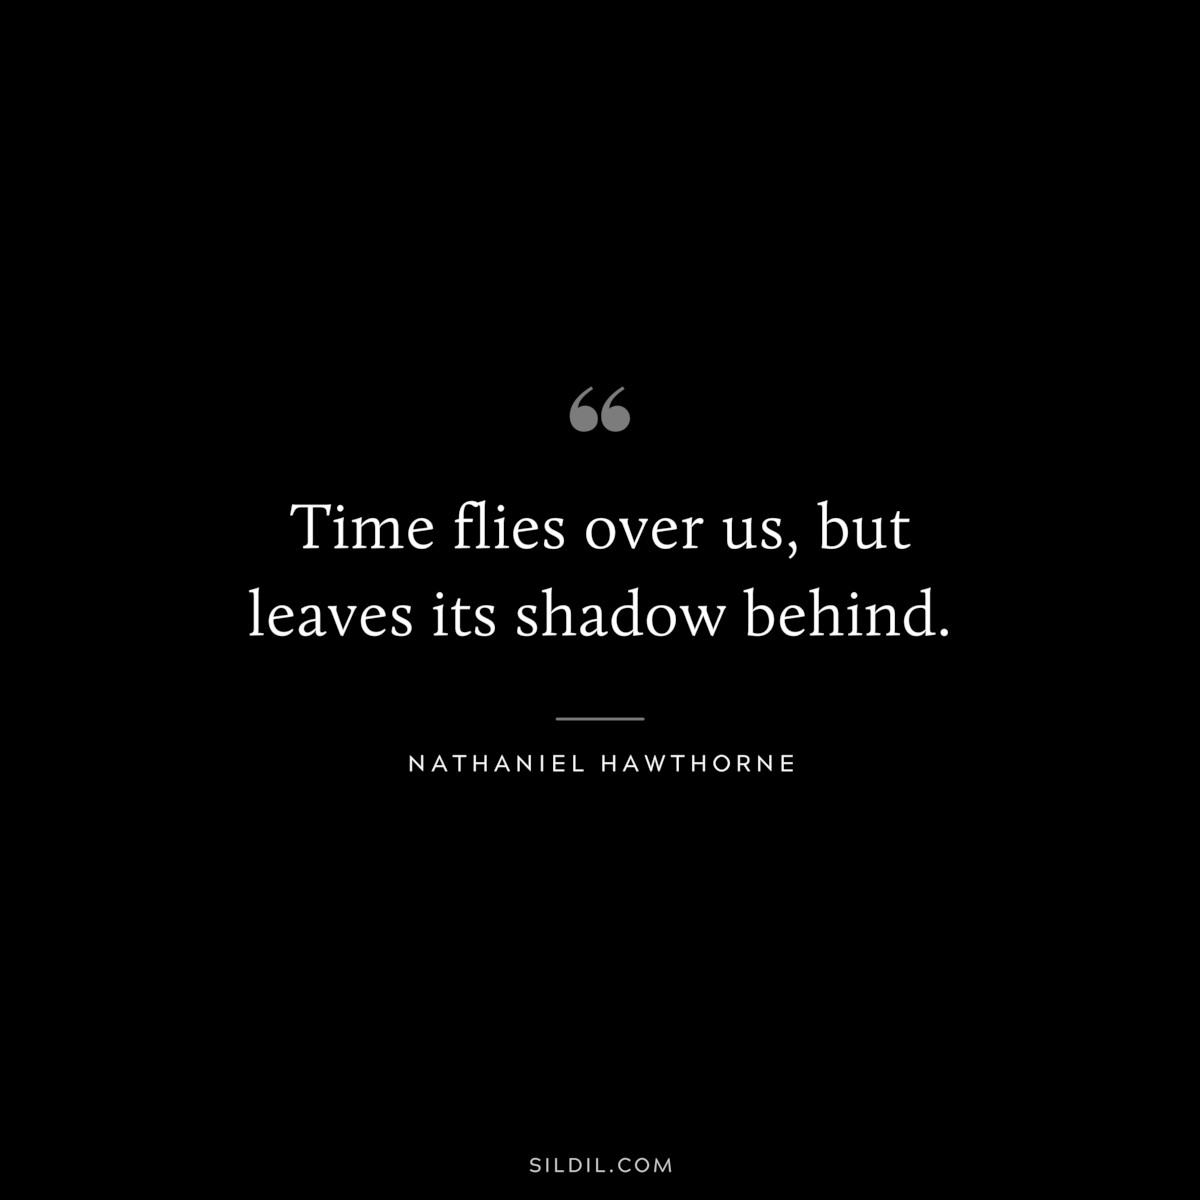 Time flies over us, but leaves its shadow behind. ― Nathaniel Hawthorne